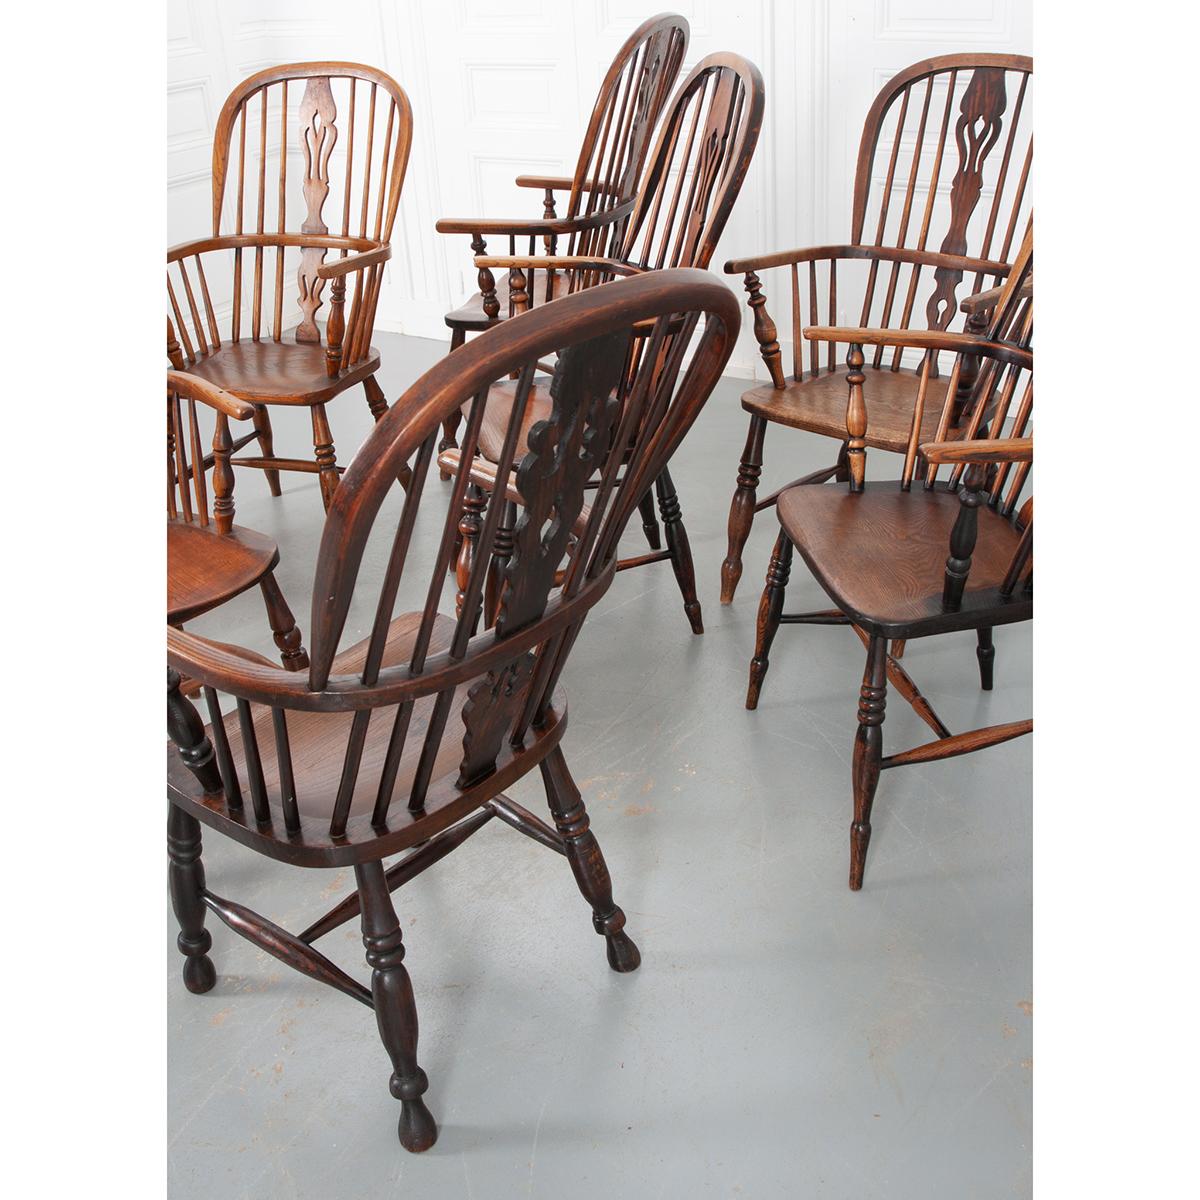 English 19th Century Set of 8 Oak Windsor Chairs In Good Condition For Sale In Baton Rouge, LA